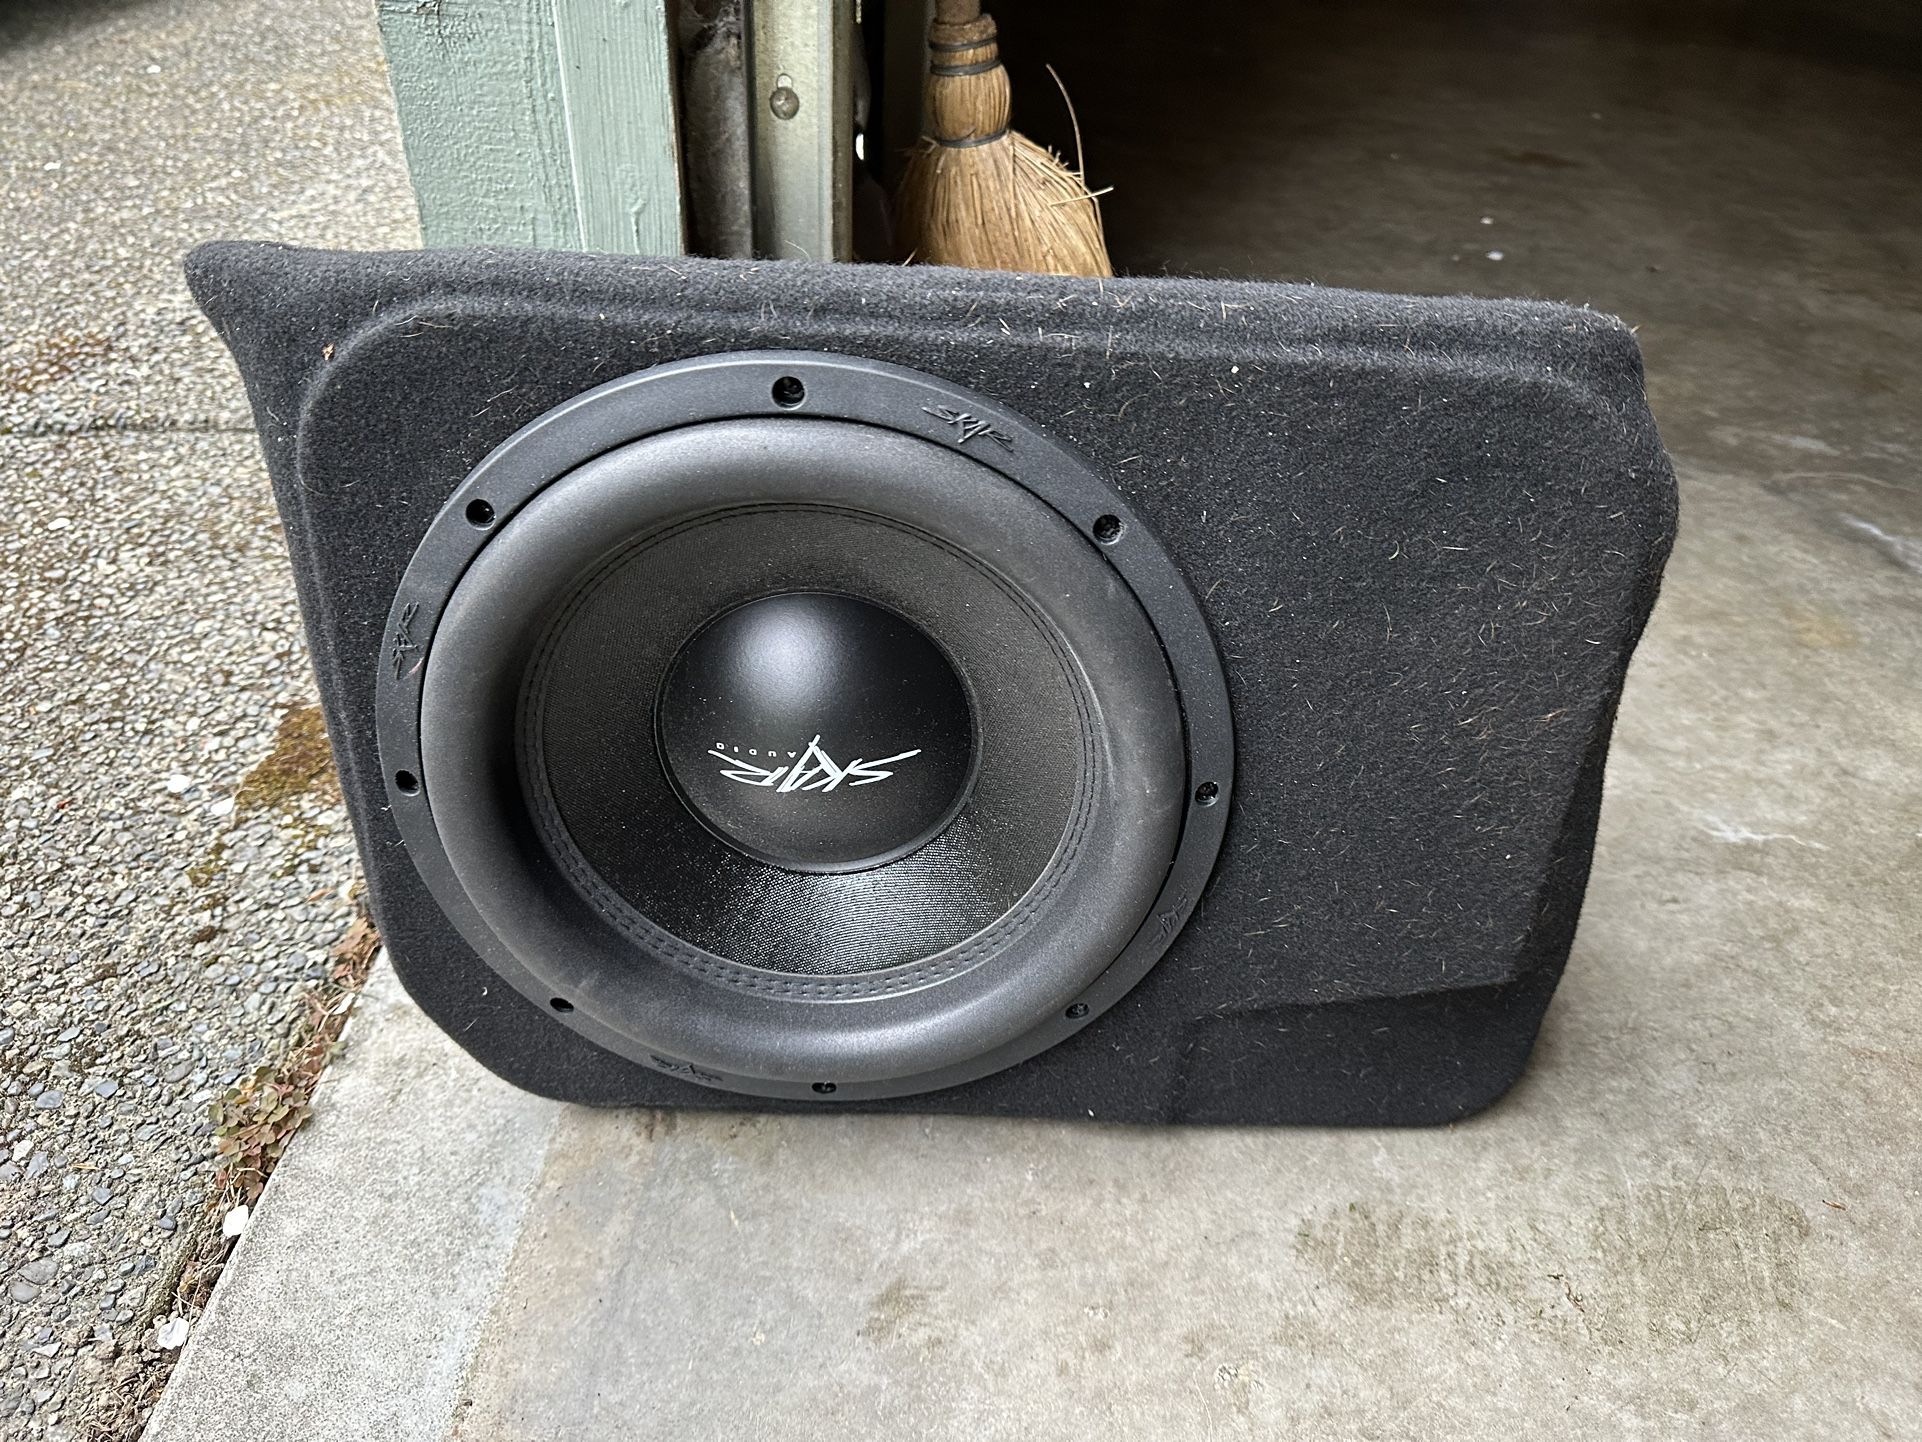 Subwoofer Custom Made It For Prius Fit Perfect 12 Inch Speacker